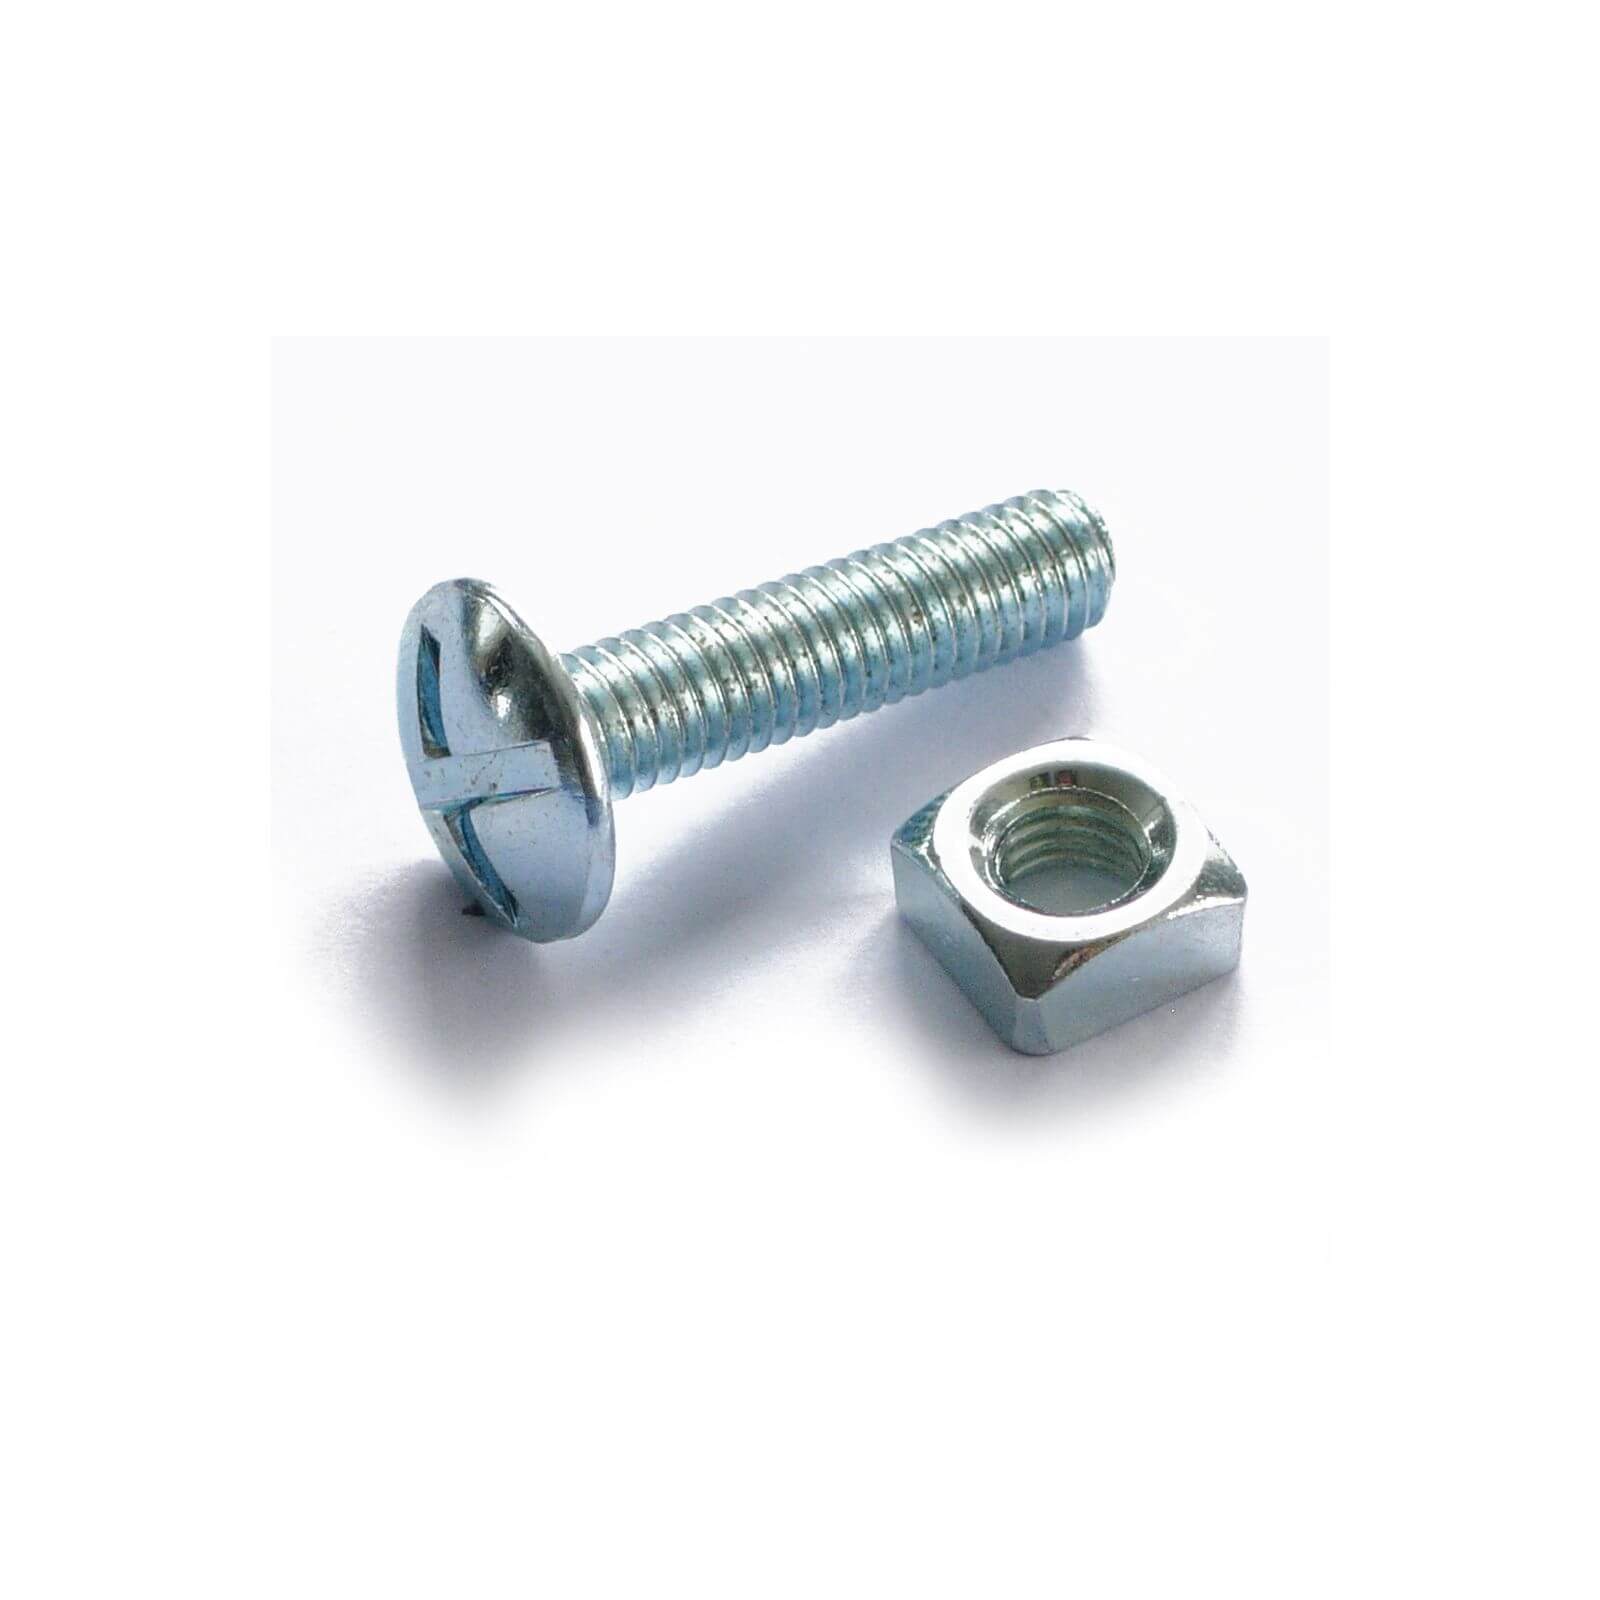 Roofing Bolt - Bright Zinc Plated - M6 20mm - 10 Pack